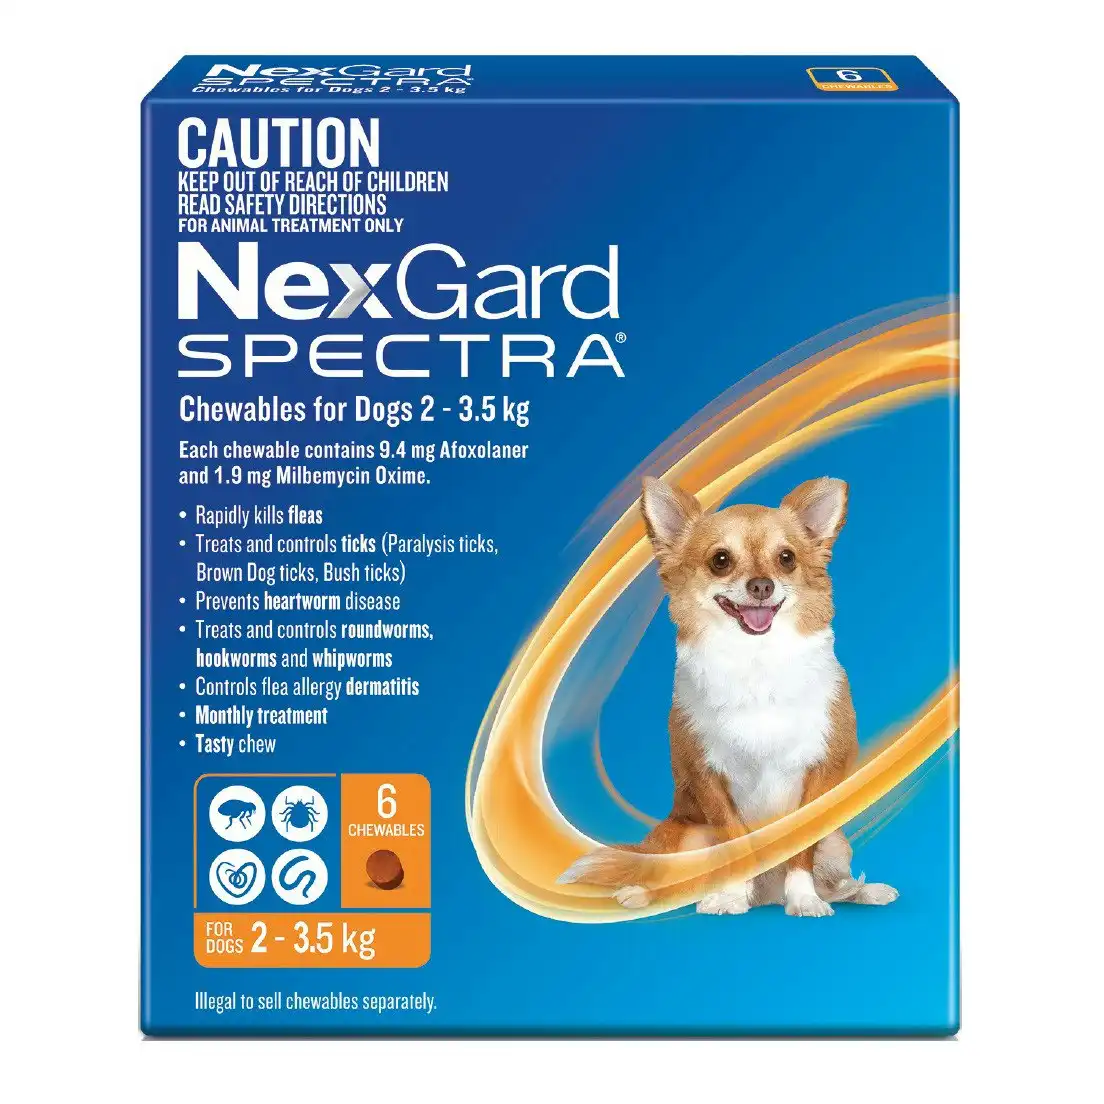 Nexgard Spectra Chewables For Dogs 2 - 3.5kg 6 Pack